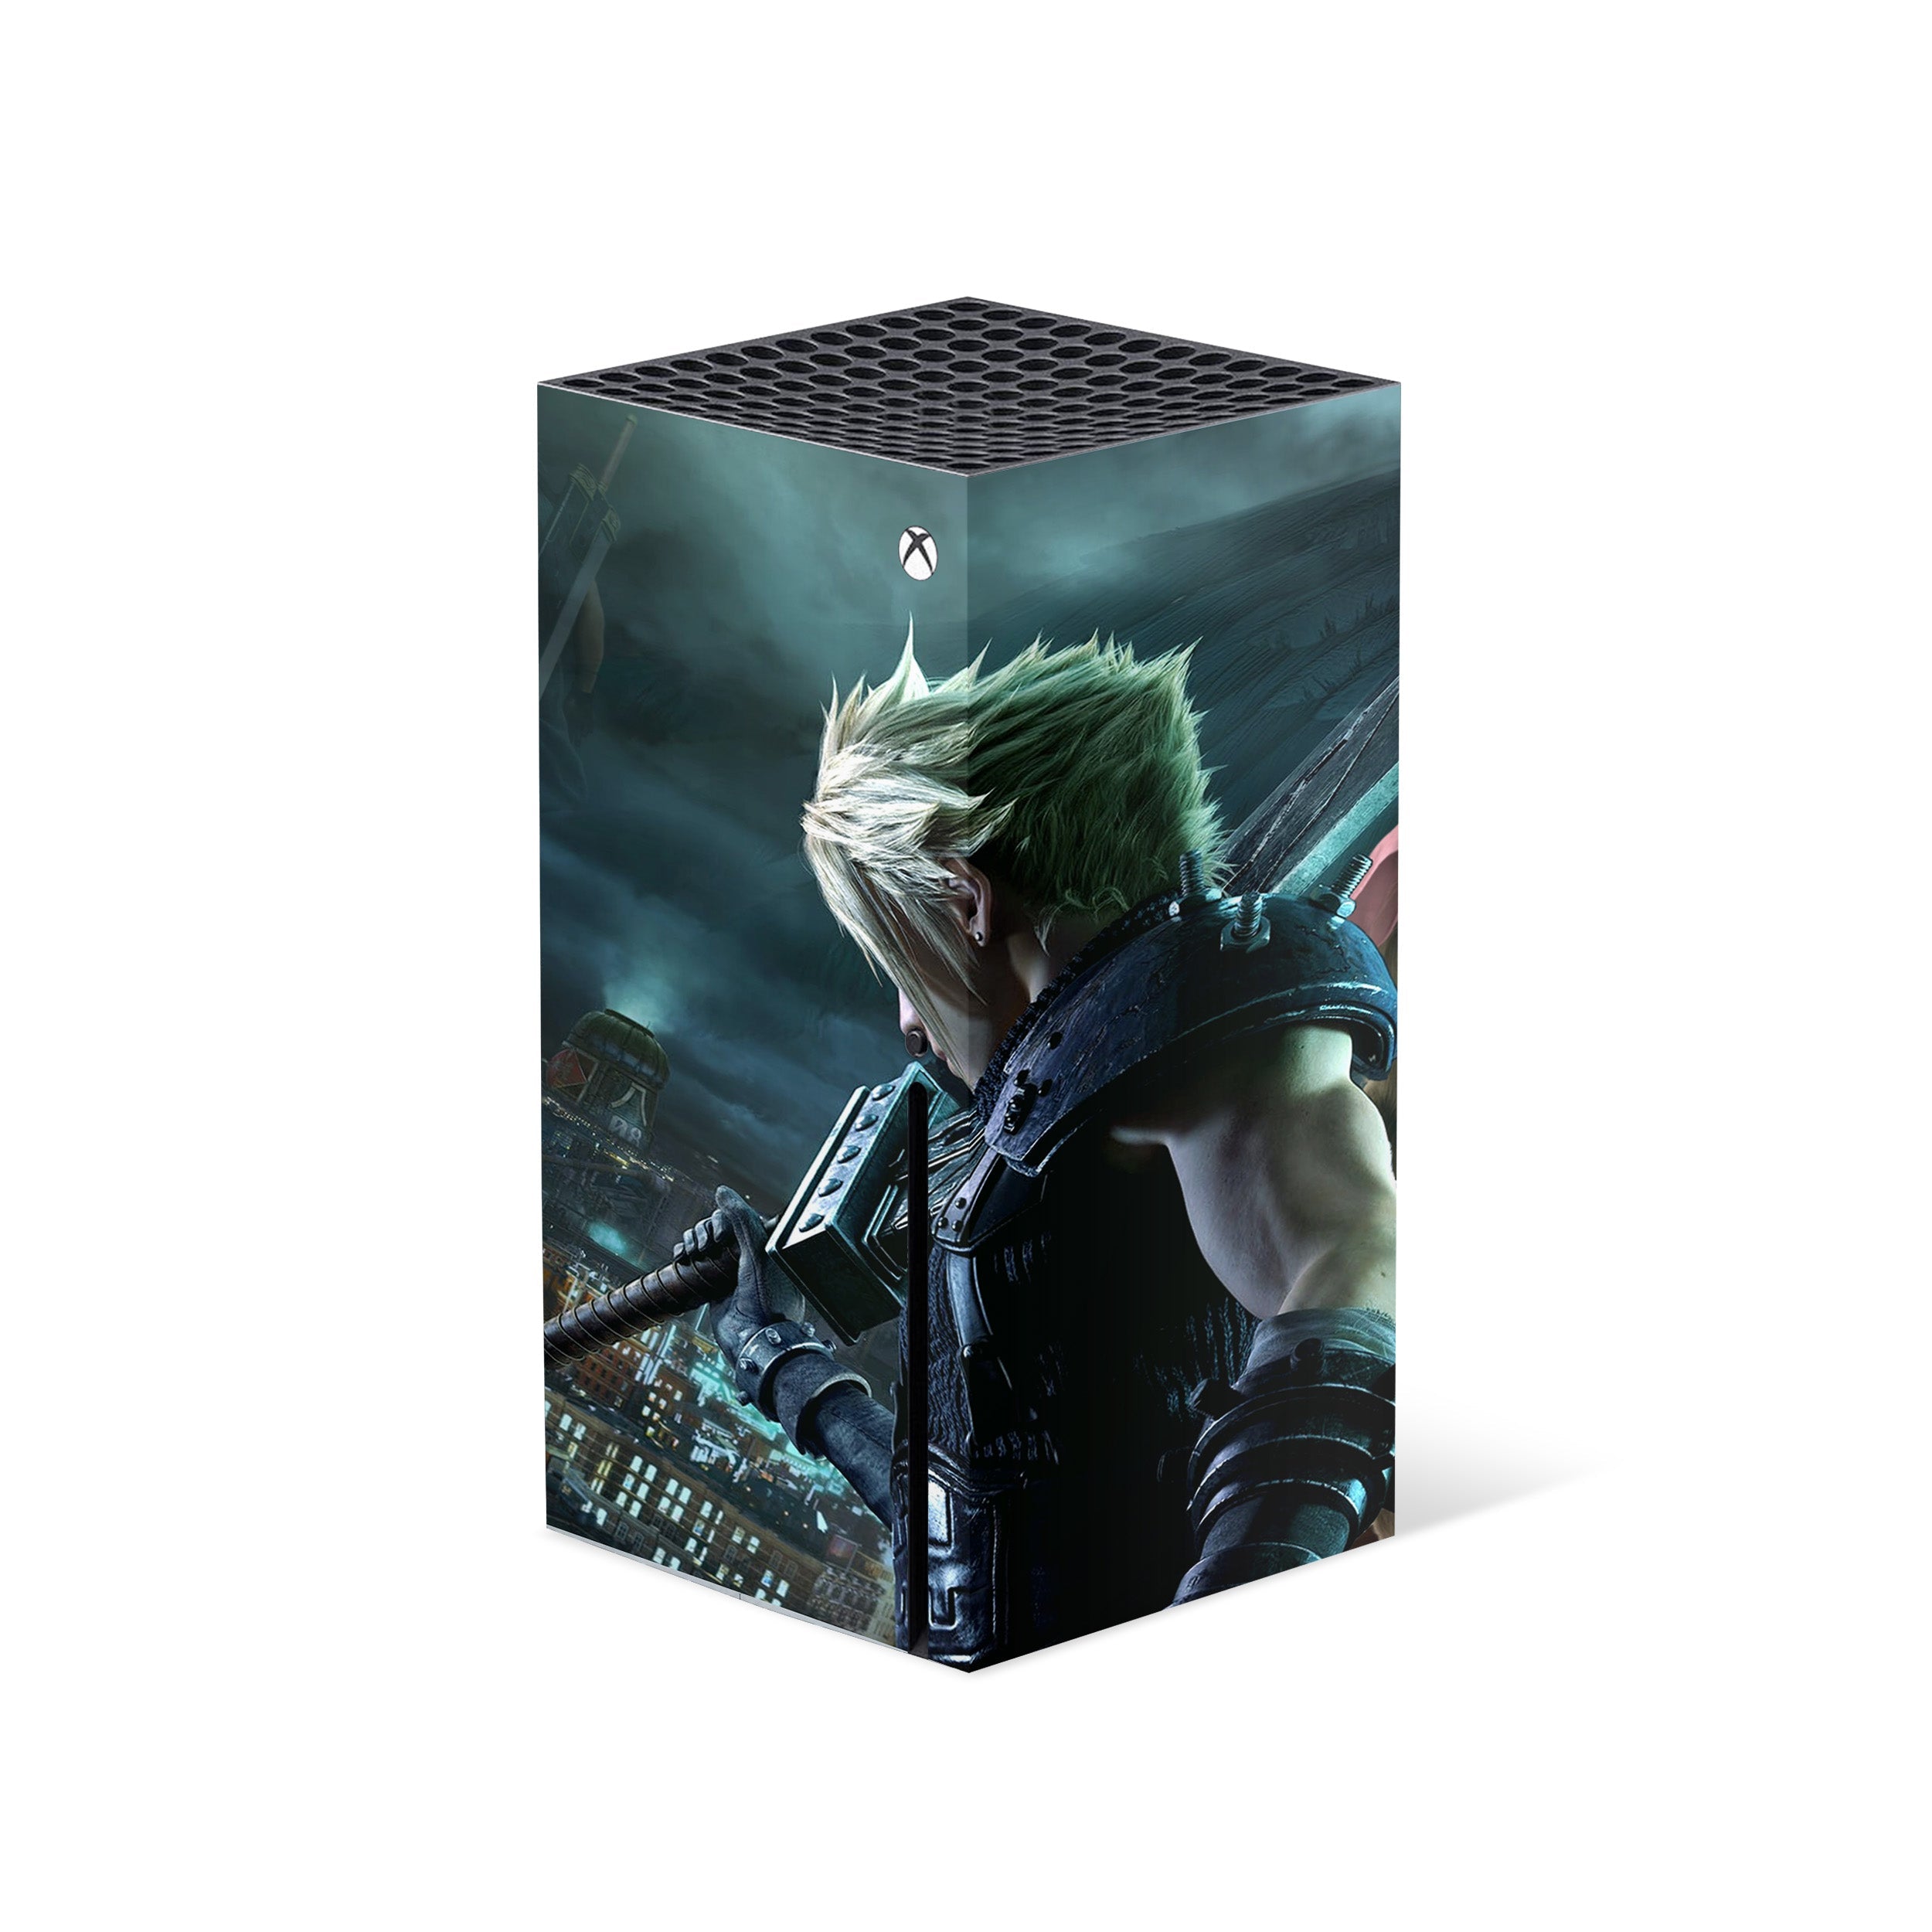 A video game skin featuring a Final Fantasy 7 Group design for the Xbox Series X.